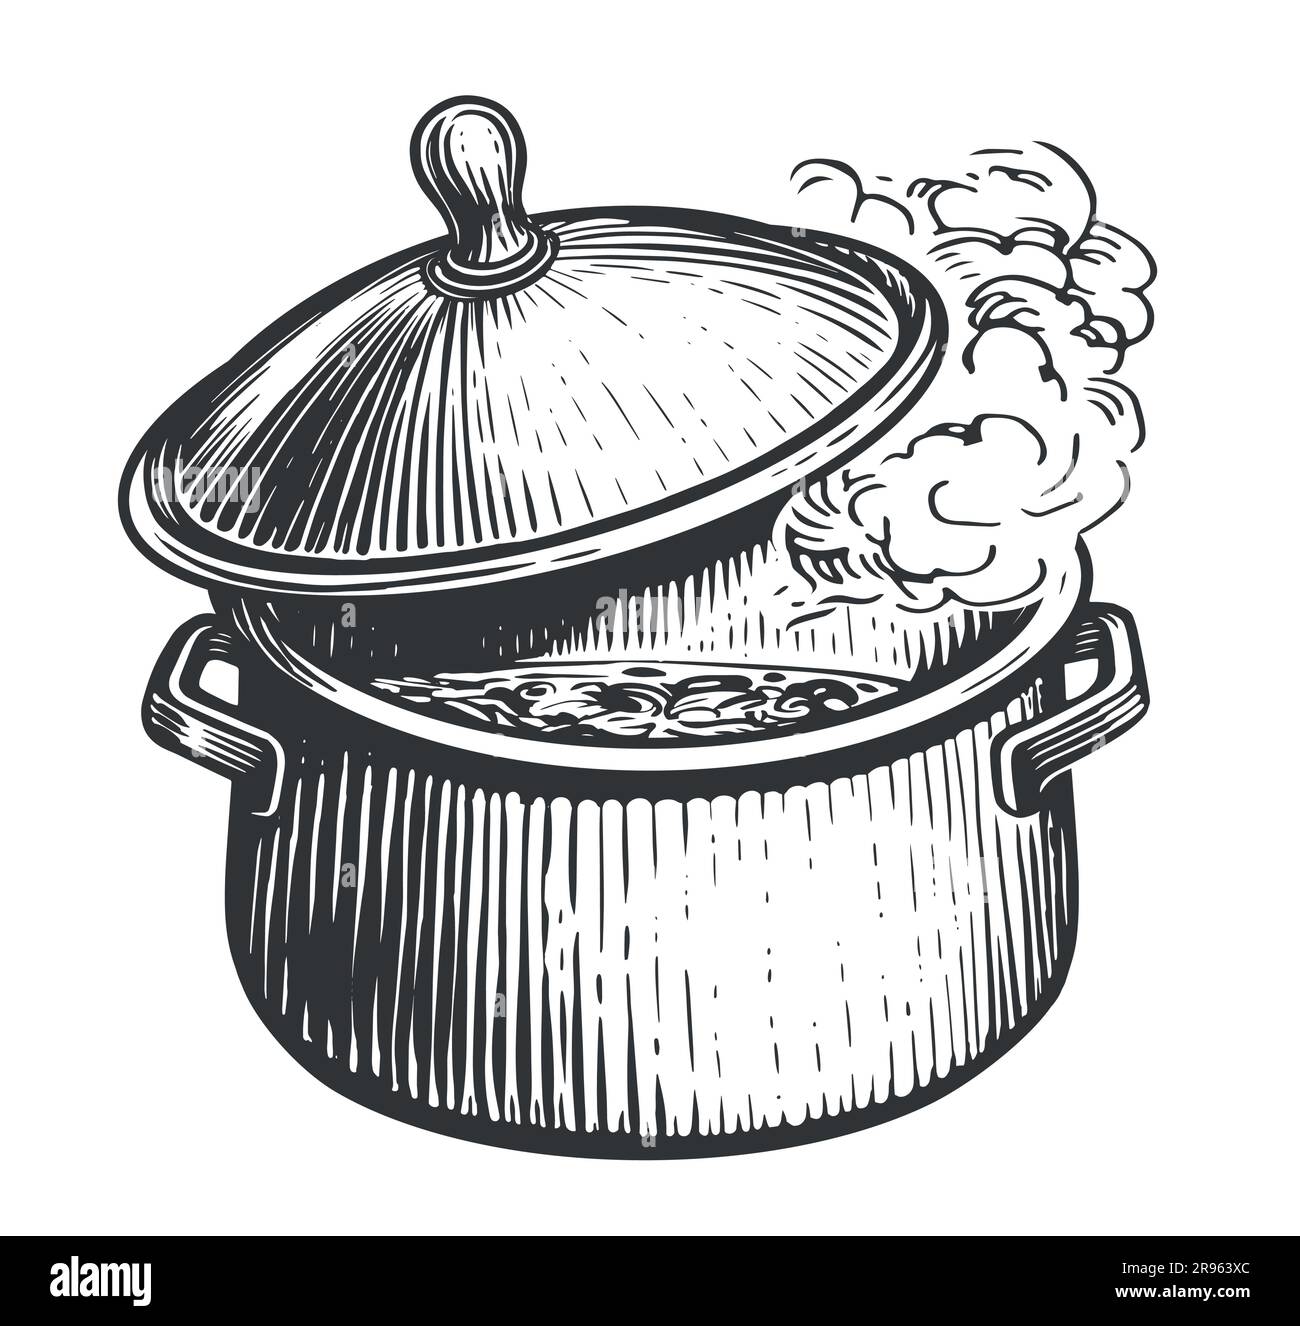 https://c8.alamy.com/comp/2R963XC/metal-pot-with-top-cooking-concept-hand-drawn-engraving-style-vector-illustration-2R963XC.jpg